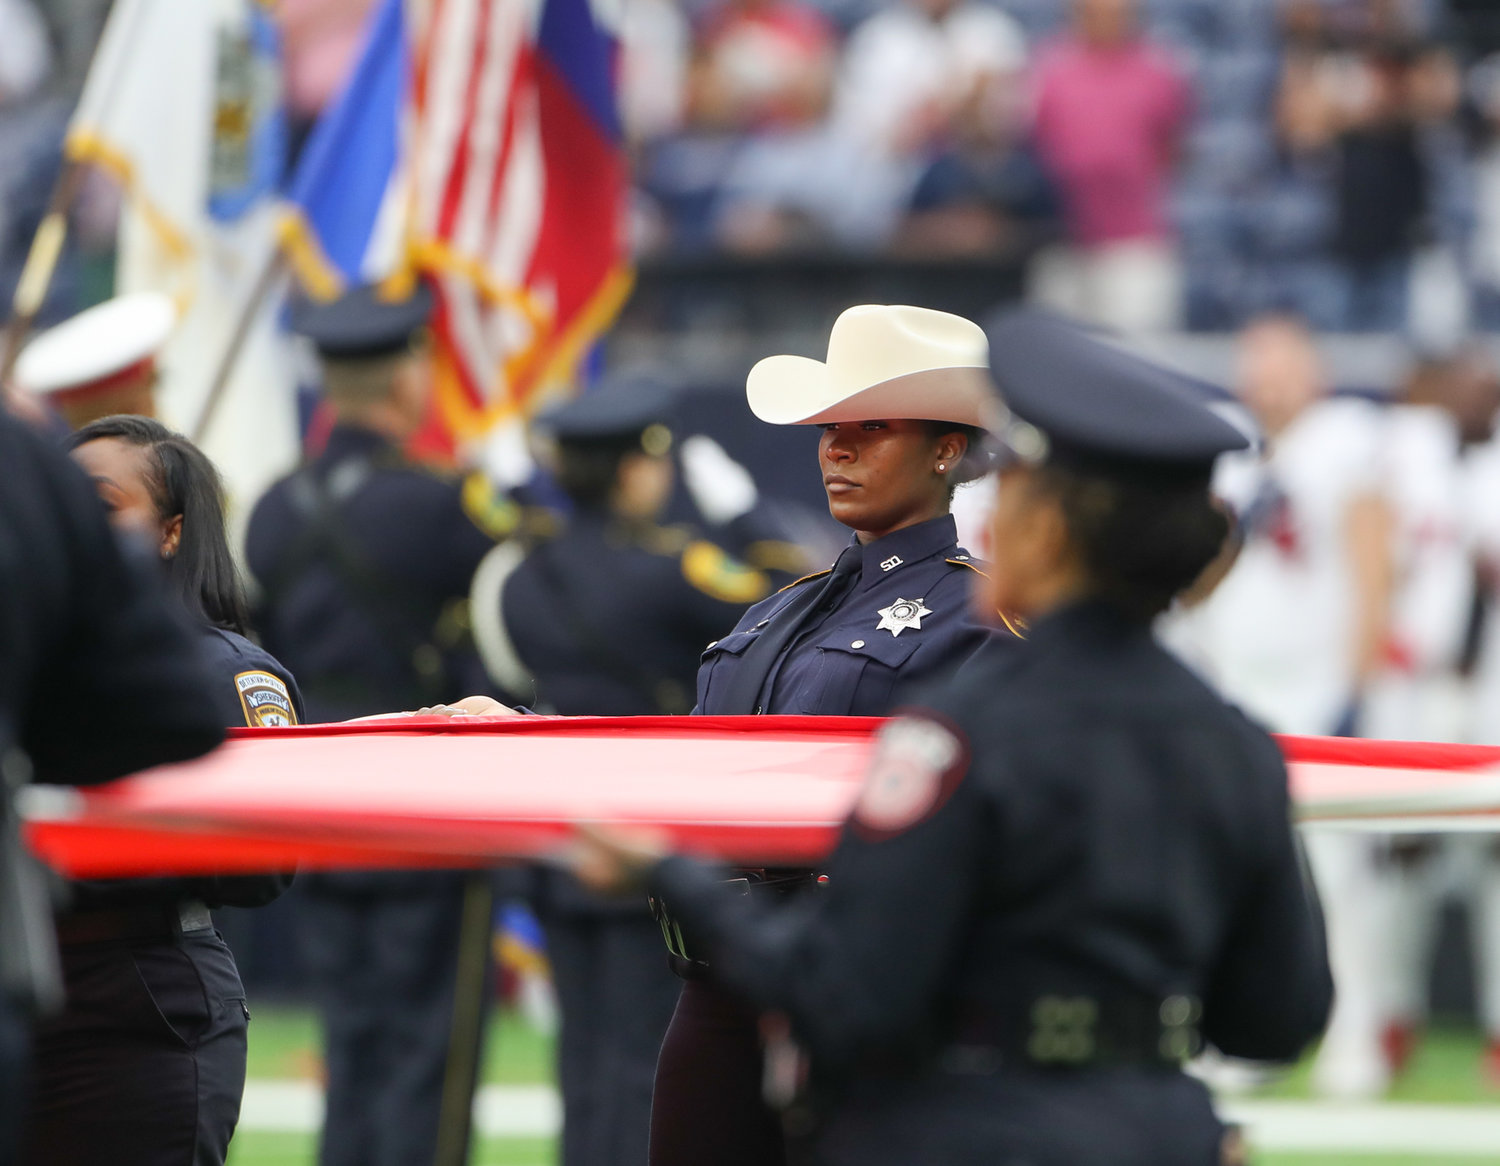 Law enforcement officers and first responders from the Houston metro area hold a flag during the national anthem before the start of an NFL game between the Houston Texans and the Jacksonville Jaguars on September 12, 2021 in Houston, Texas.